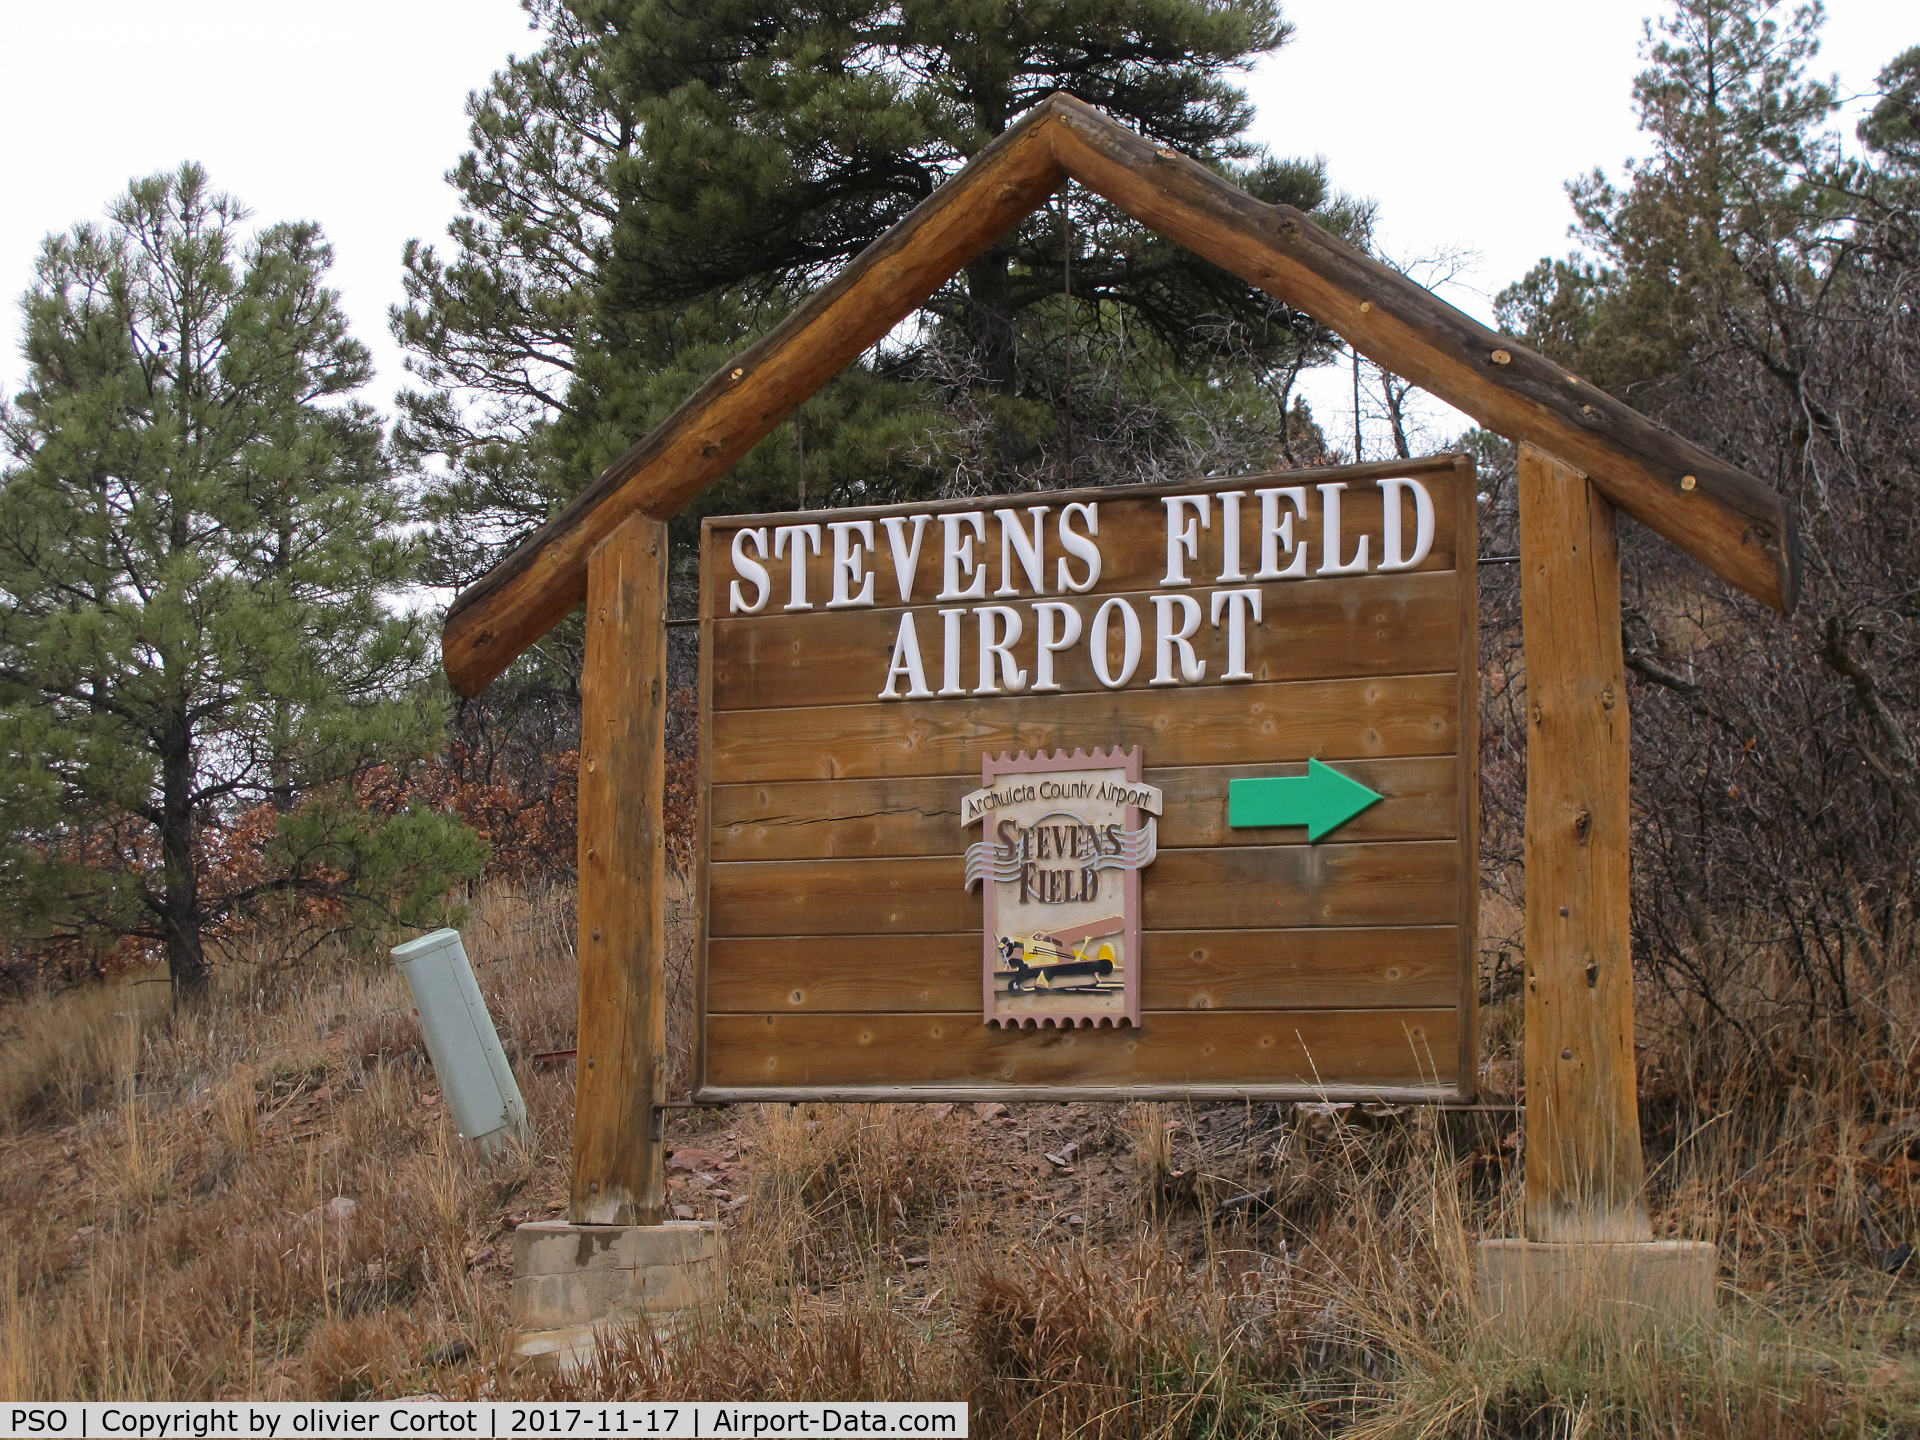 Stevens Field Airport (PSO) - the road sign